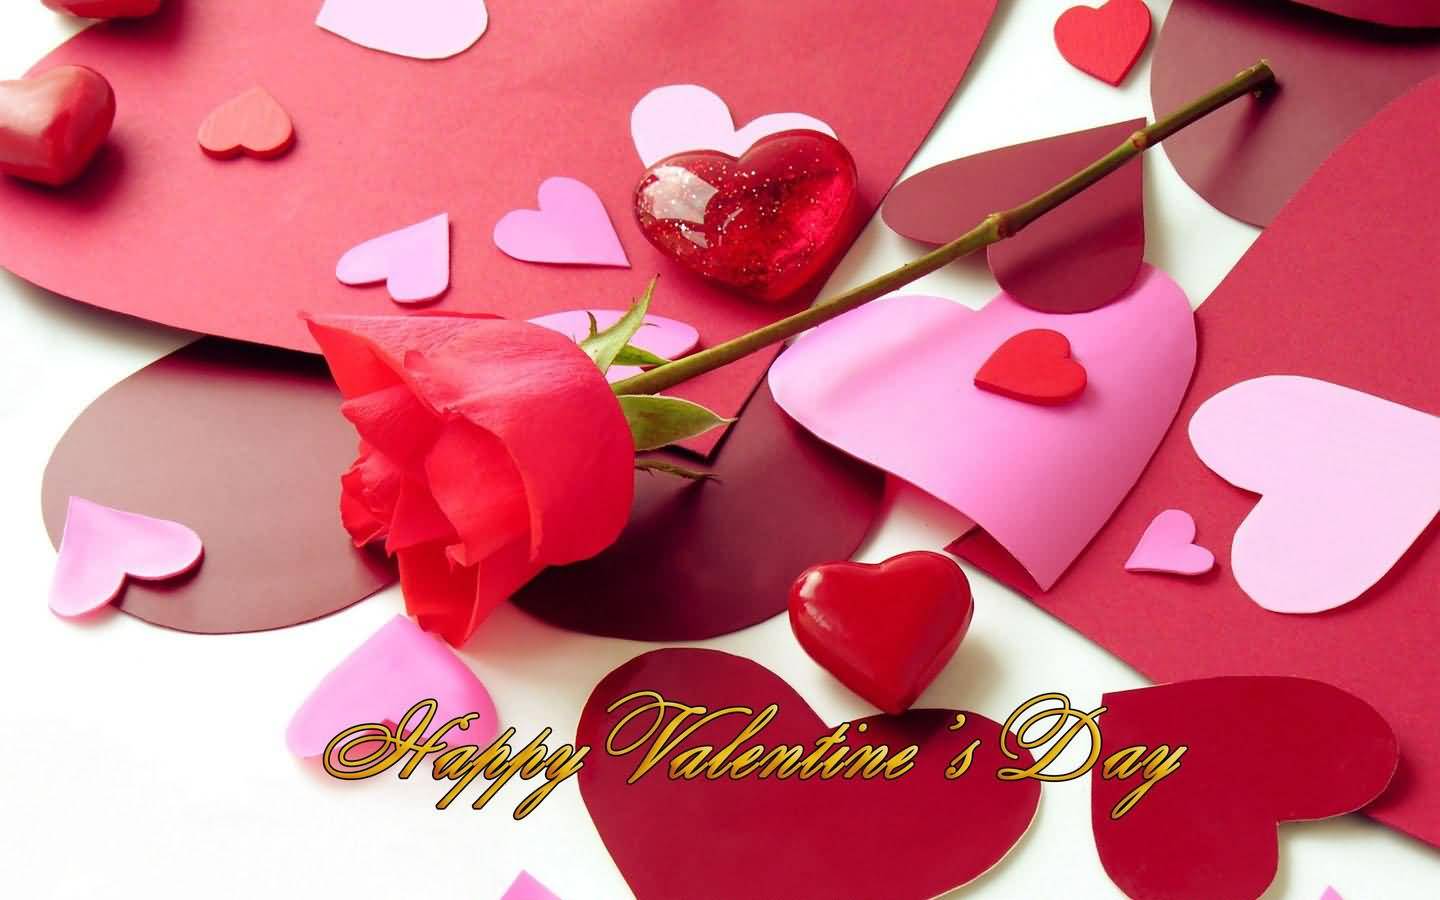 Happy Valentine’s Day Paper Hearts And Rose Bud Wallpaper